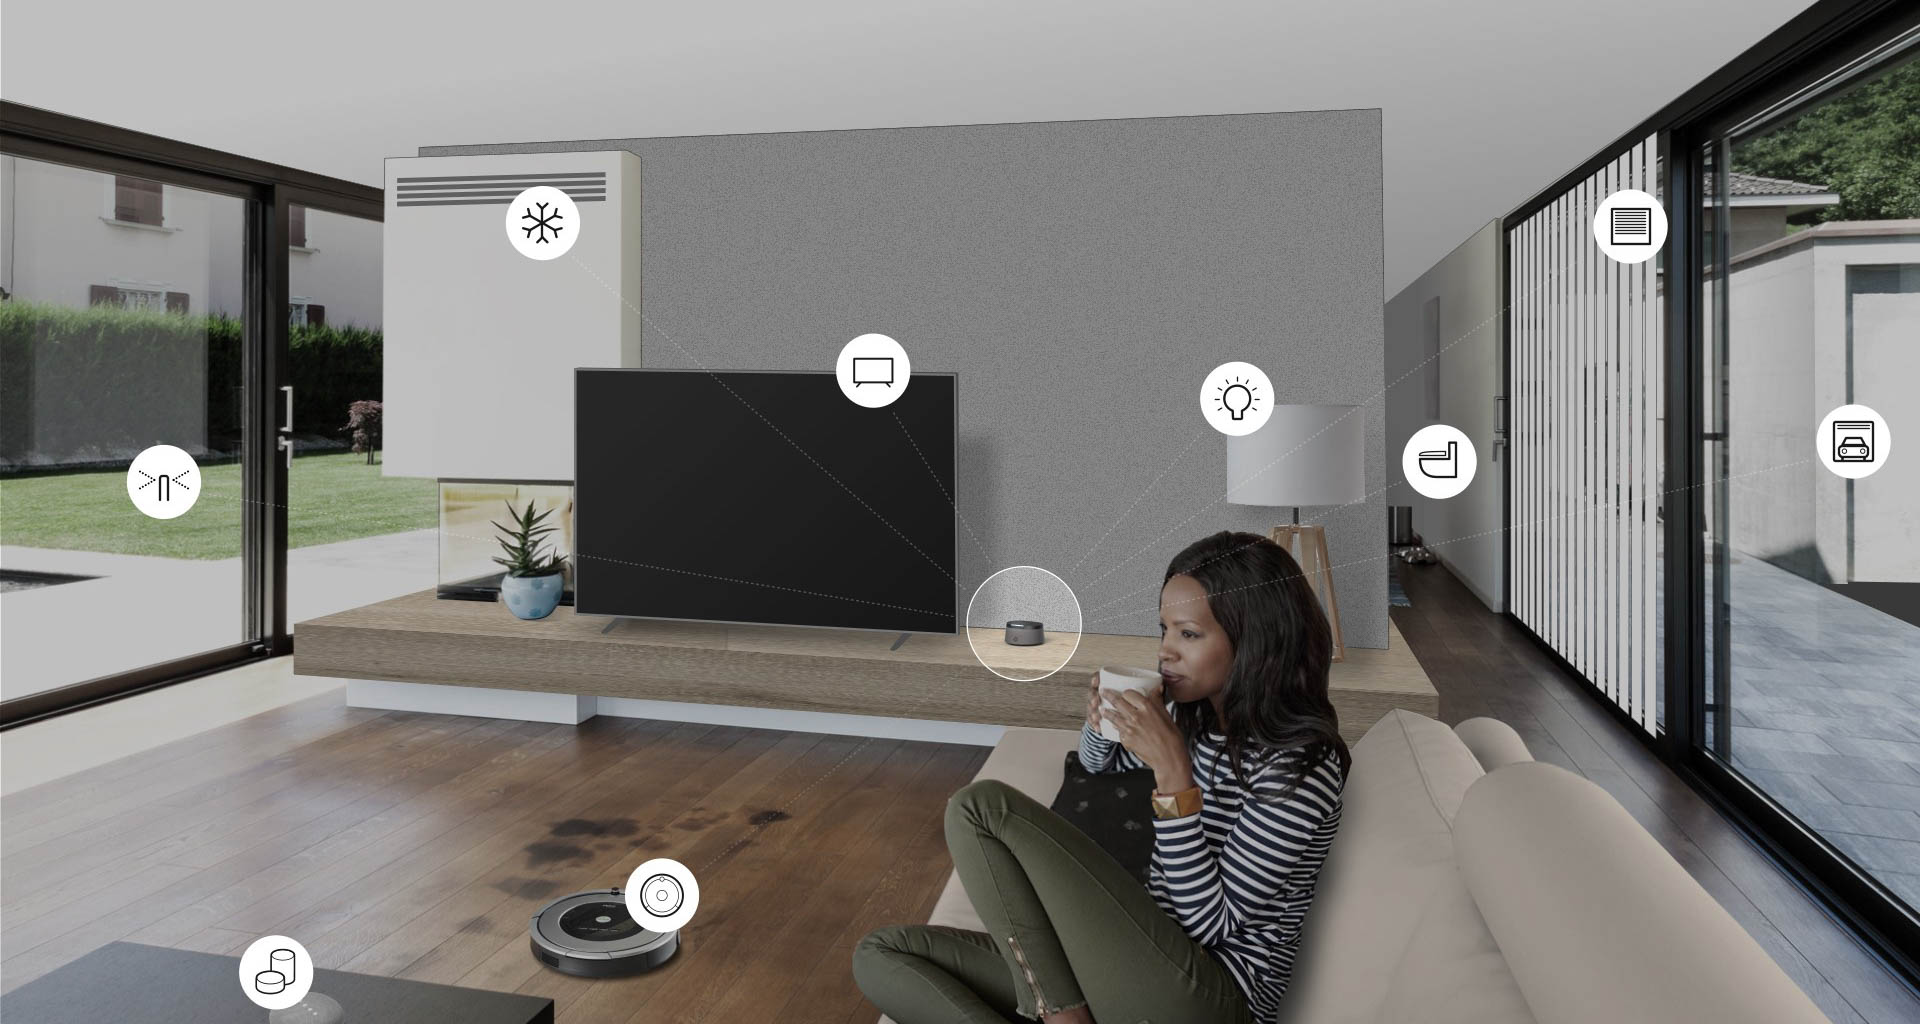 The Works with Quickset integration program certifies devices from both entertainment and smart home device manufacturers. Image: Universal Electronics.